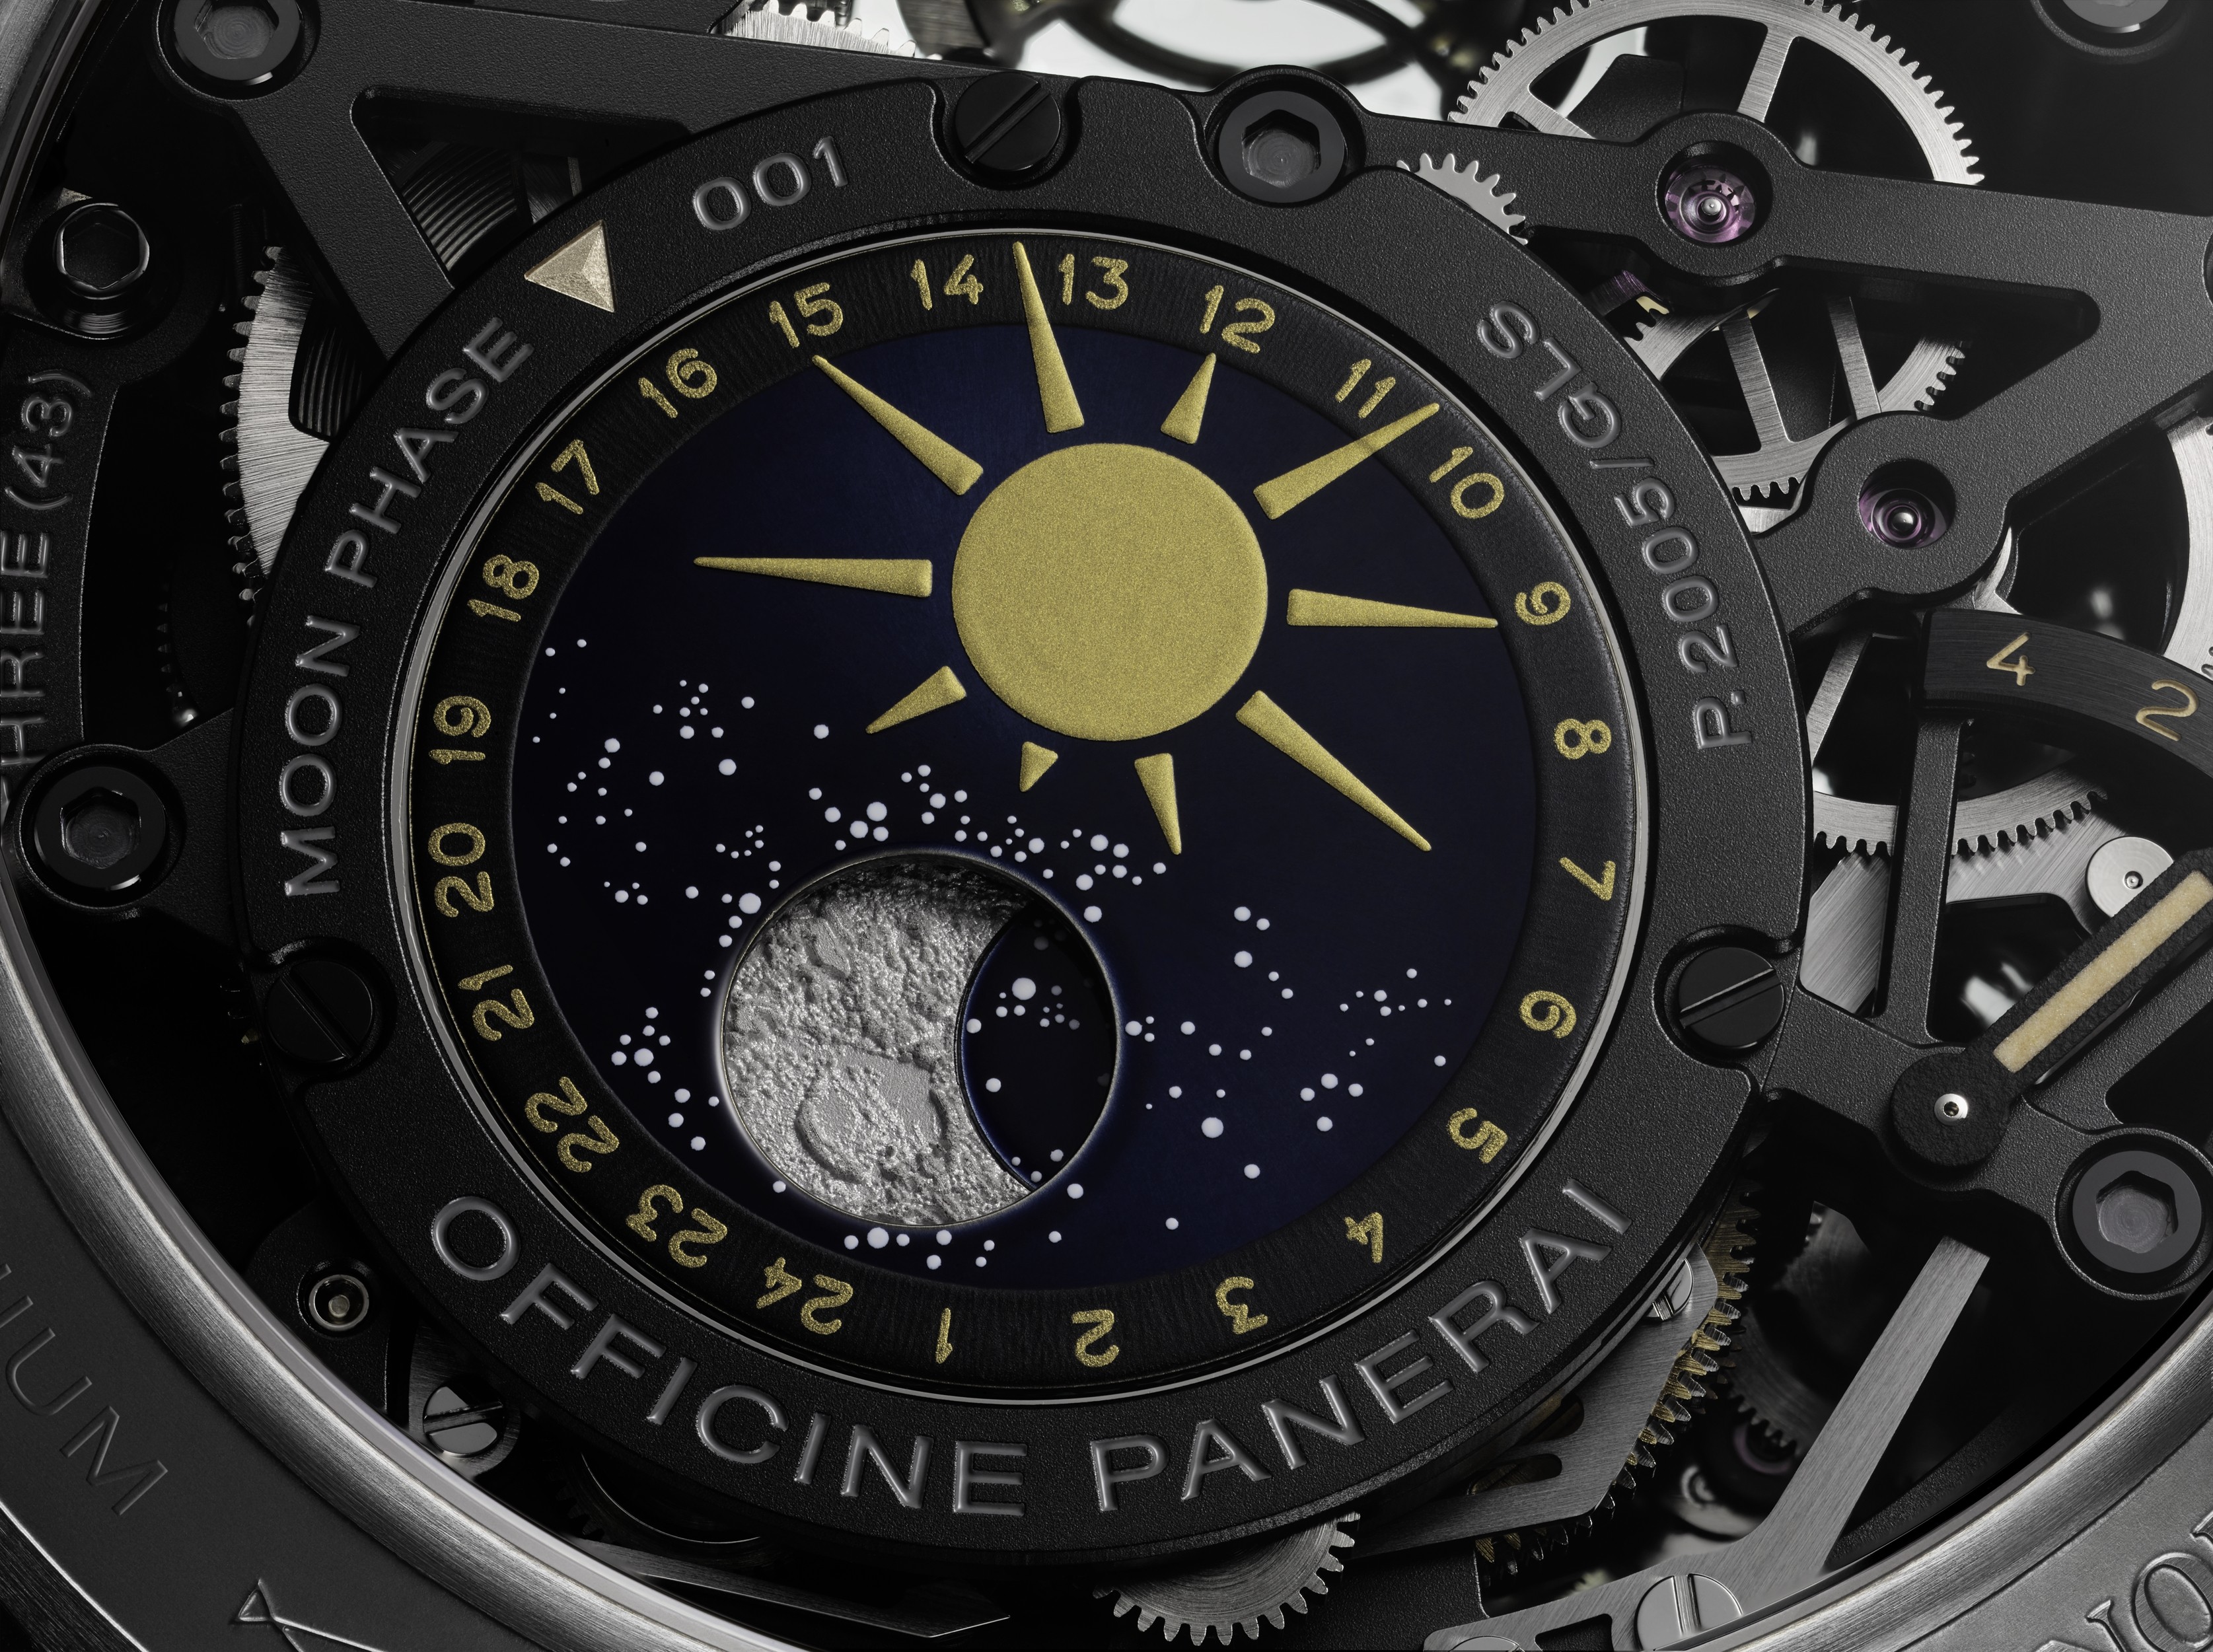 L’Astronomo Luminor 1950 Tourbillon Moon Phases Equation of Time GMT is dedicated to Galileo Galilei. This is the first timepiece from the brand to feature a moon phase. The day/night indicator which also displays the phases of the moon is found on the caseback.